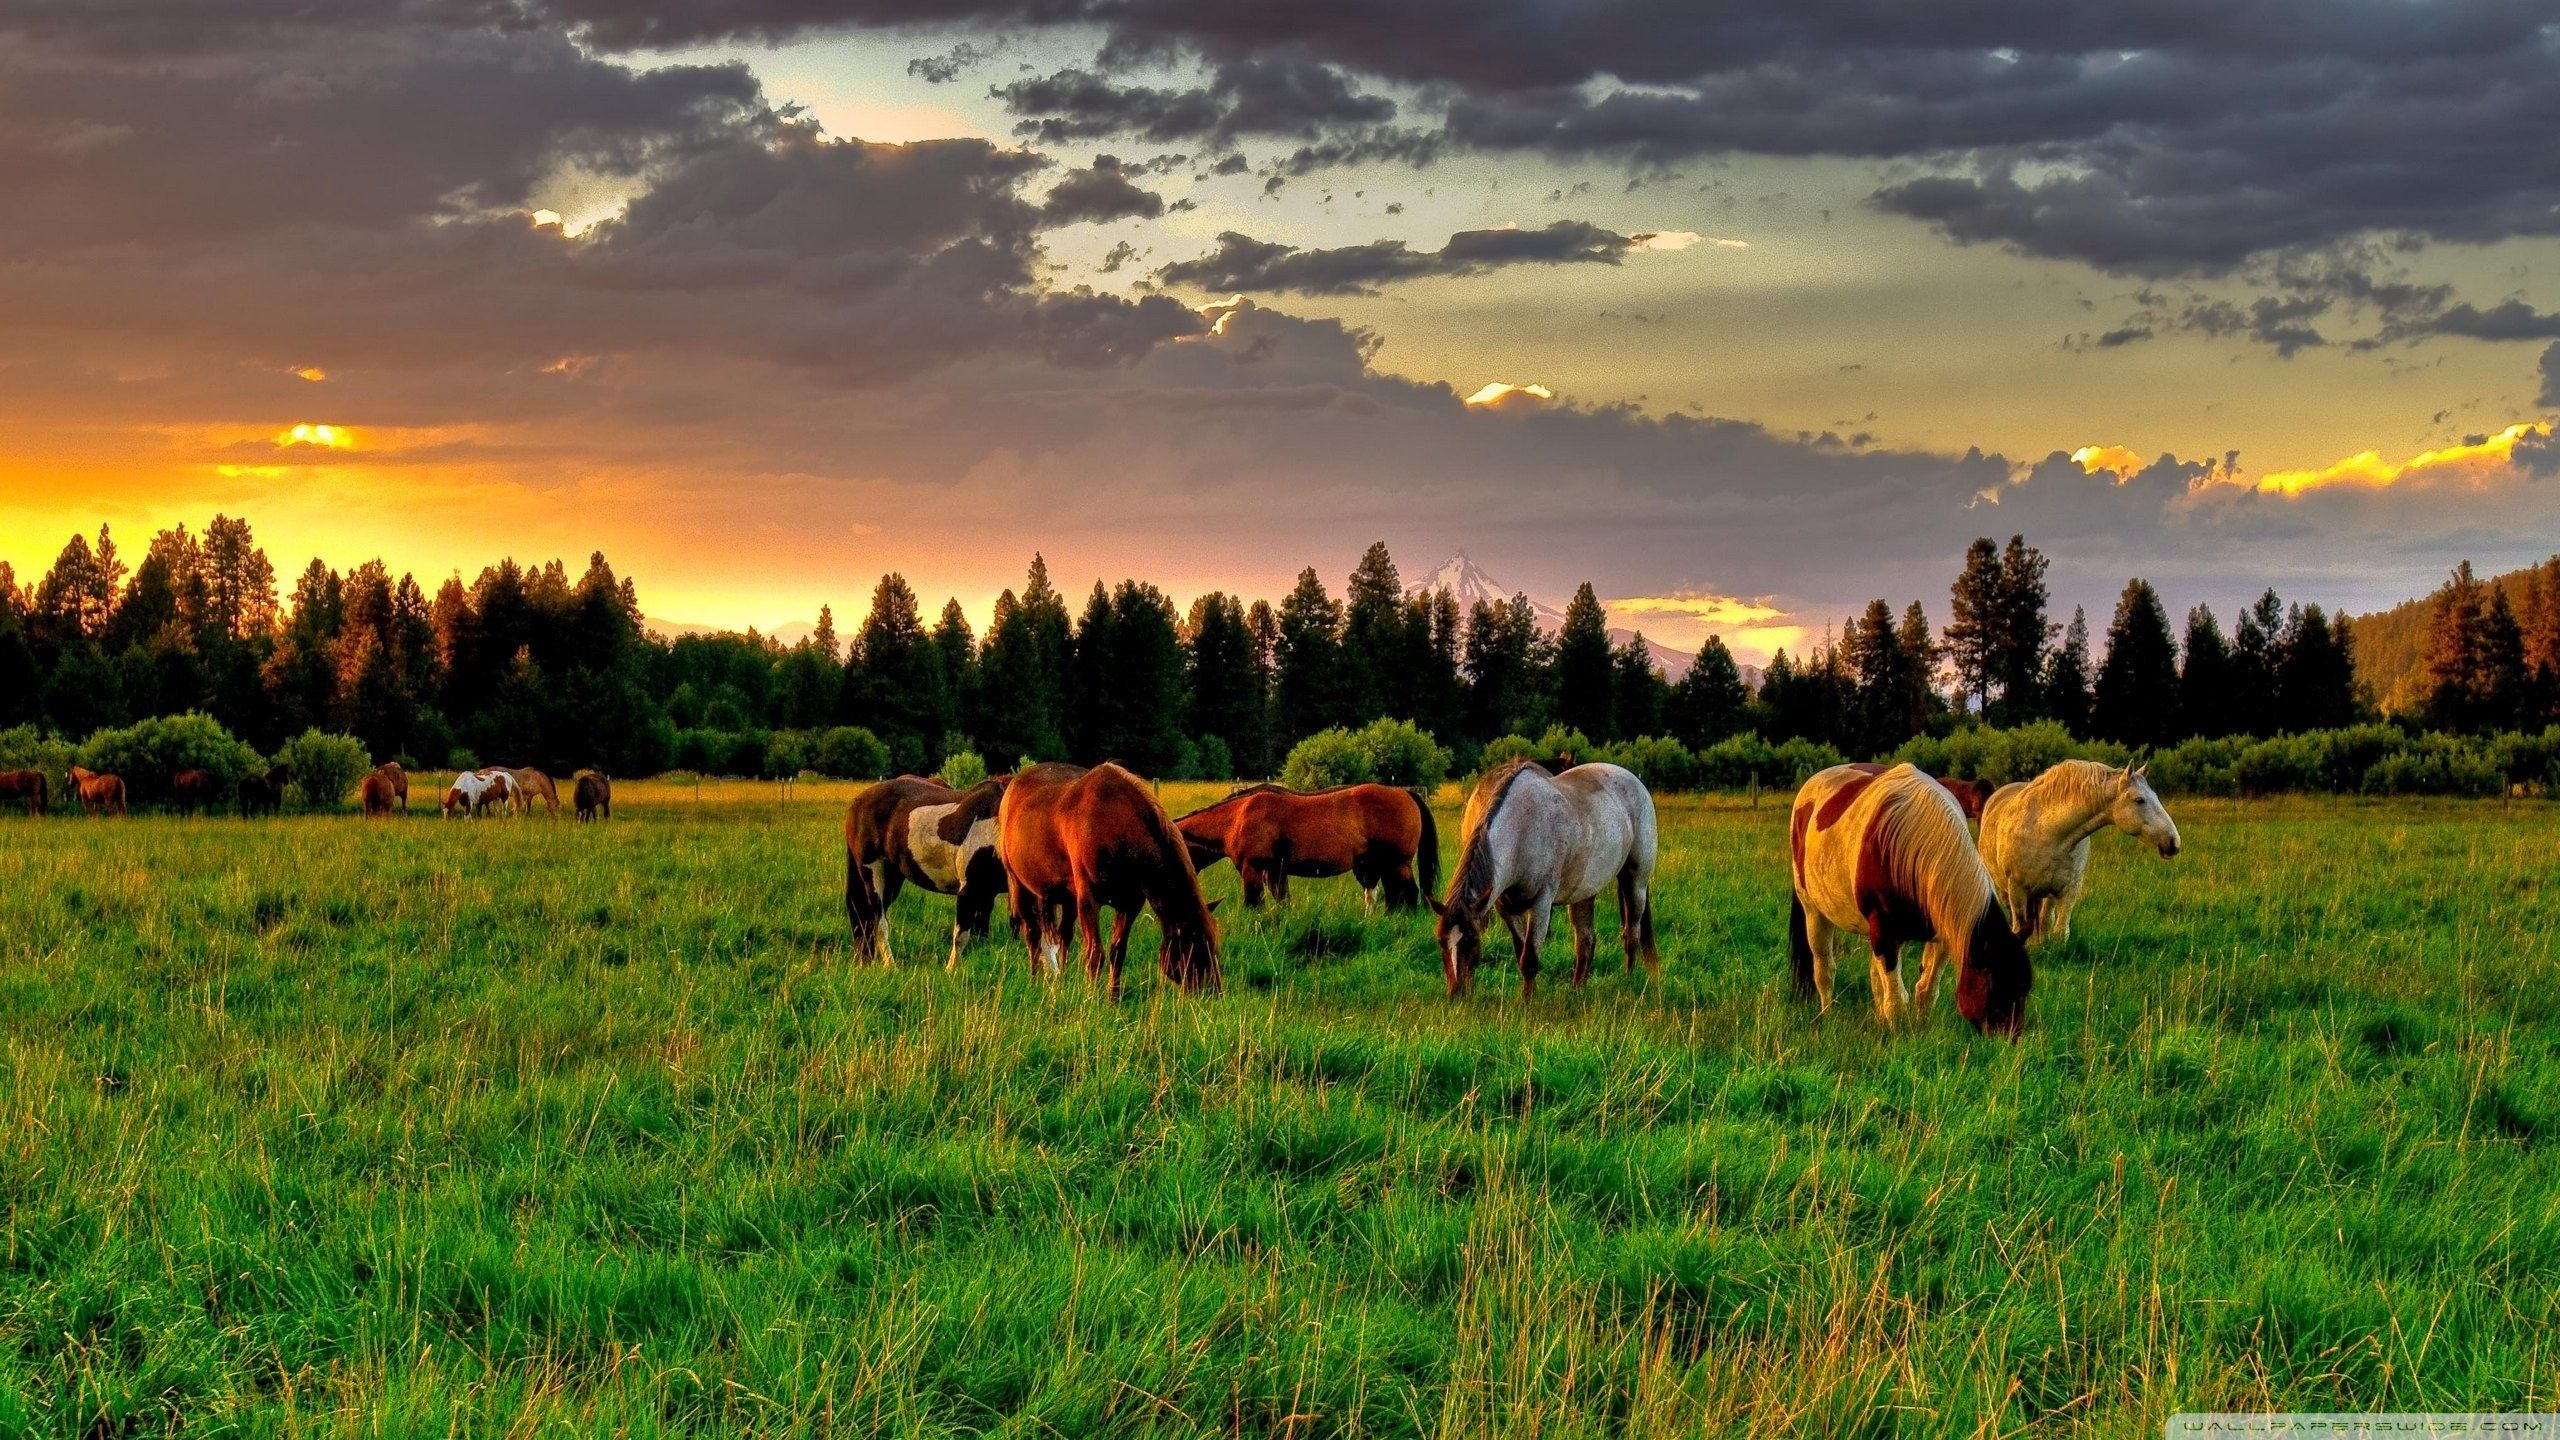 Horses Grazing In A Field Ultra HD Desktop Background Wallpaper for 4K UHD TV, Multi Display, Dual Monitor, Tablet